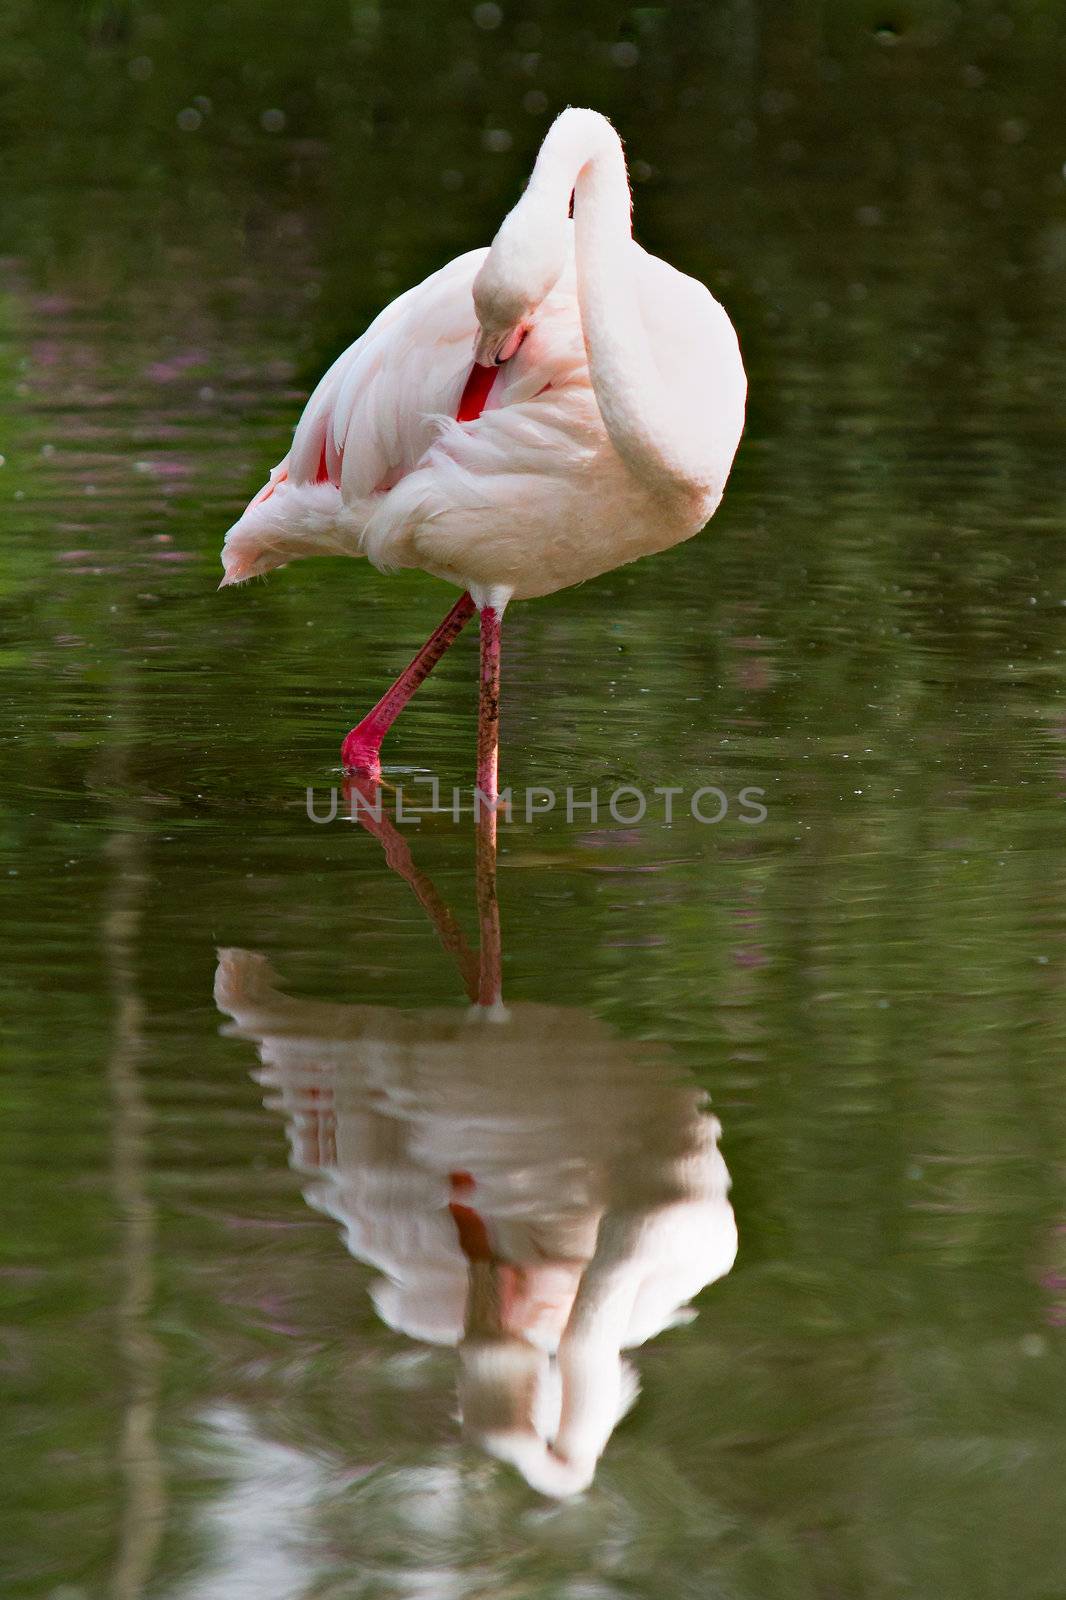 Single flamingo in water with reflection